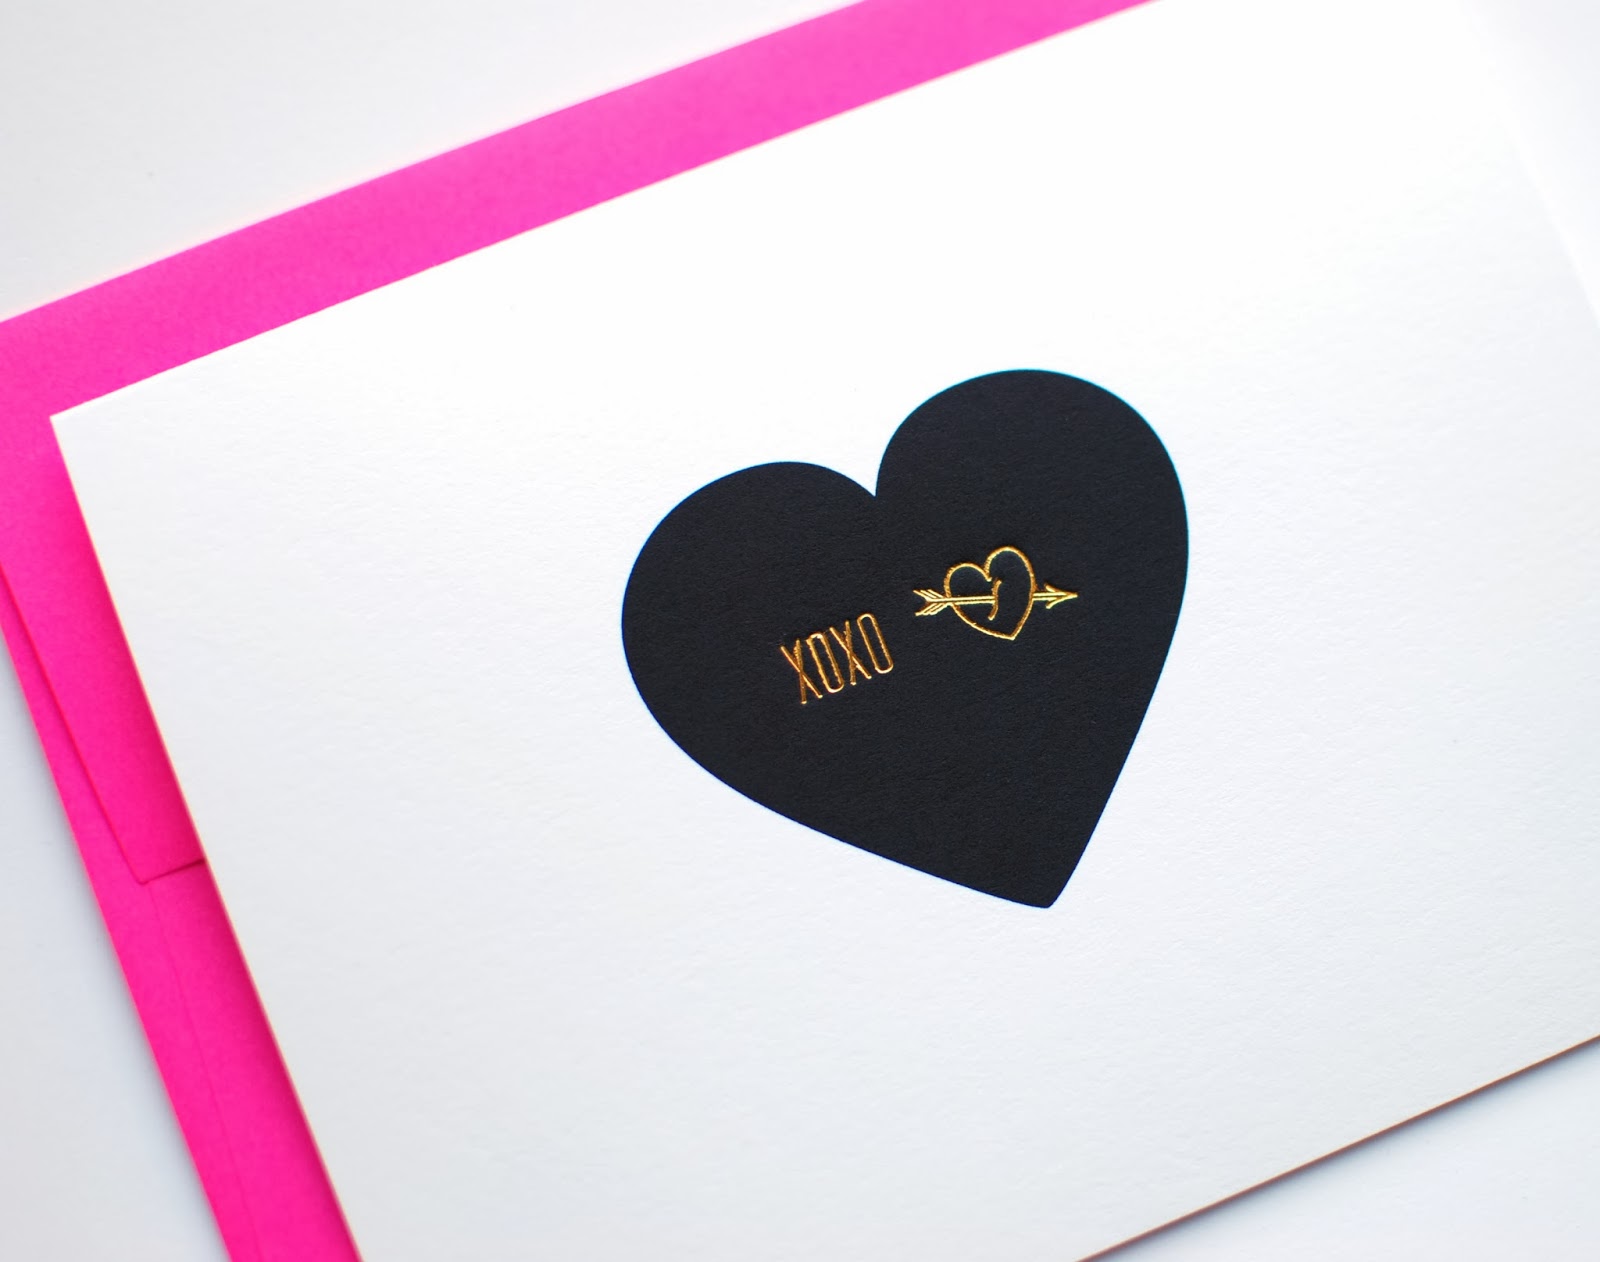 https://www.etsy.com/listing/176814929/valentine-card-valentines-day-card-gold?ref=shop_home_active_5